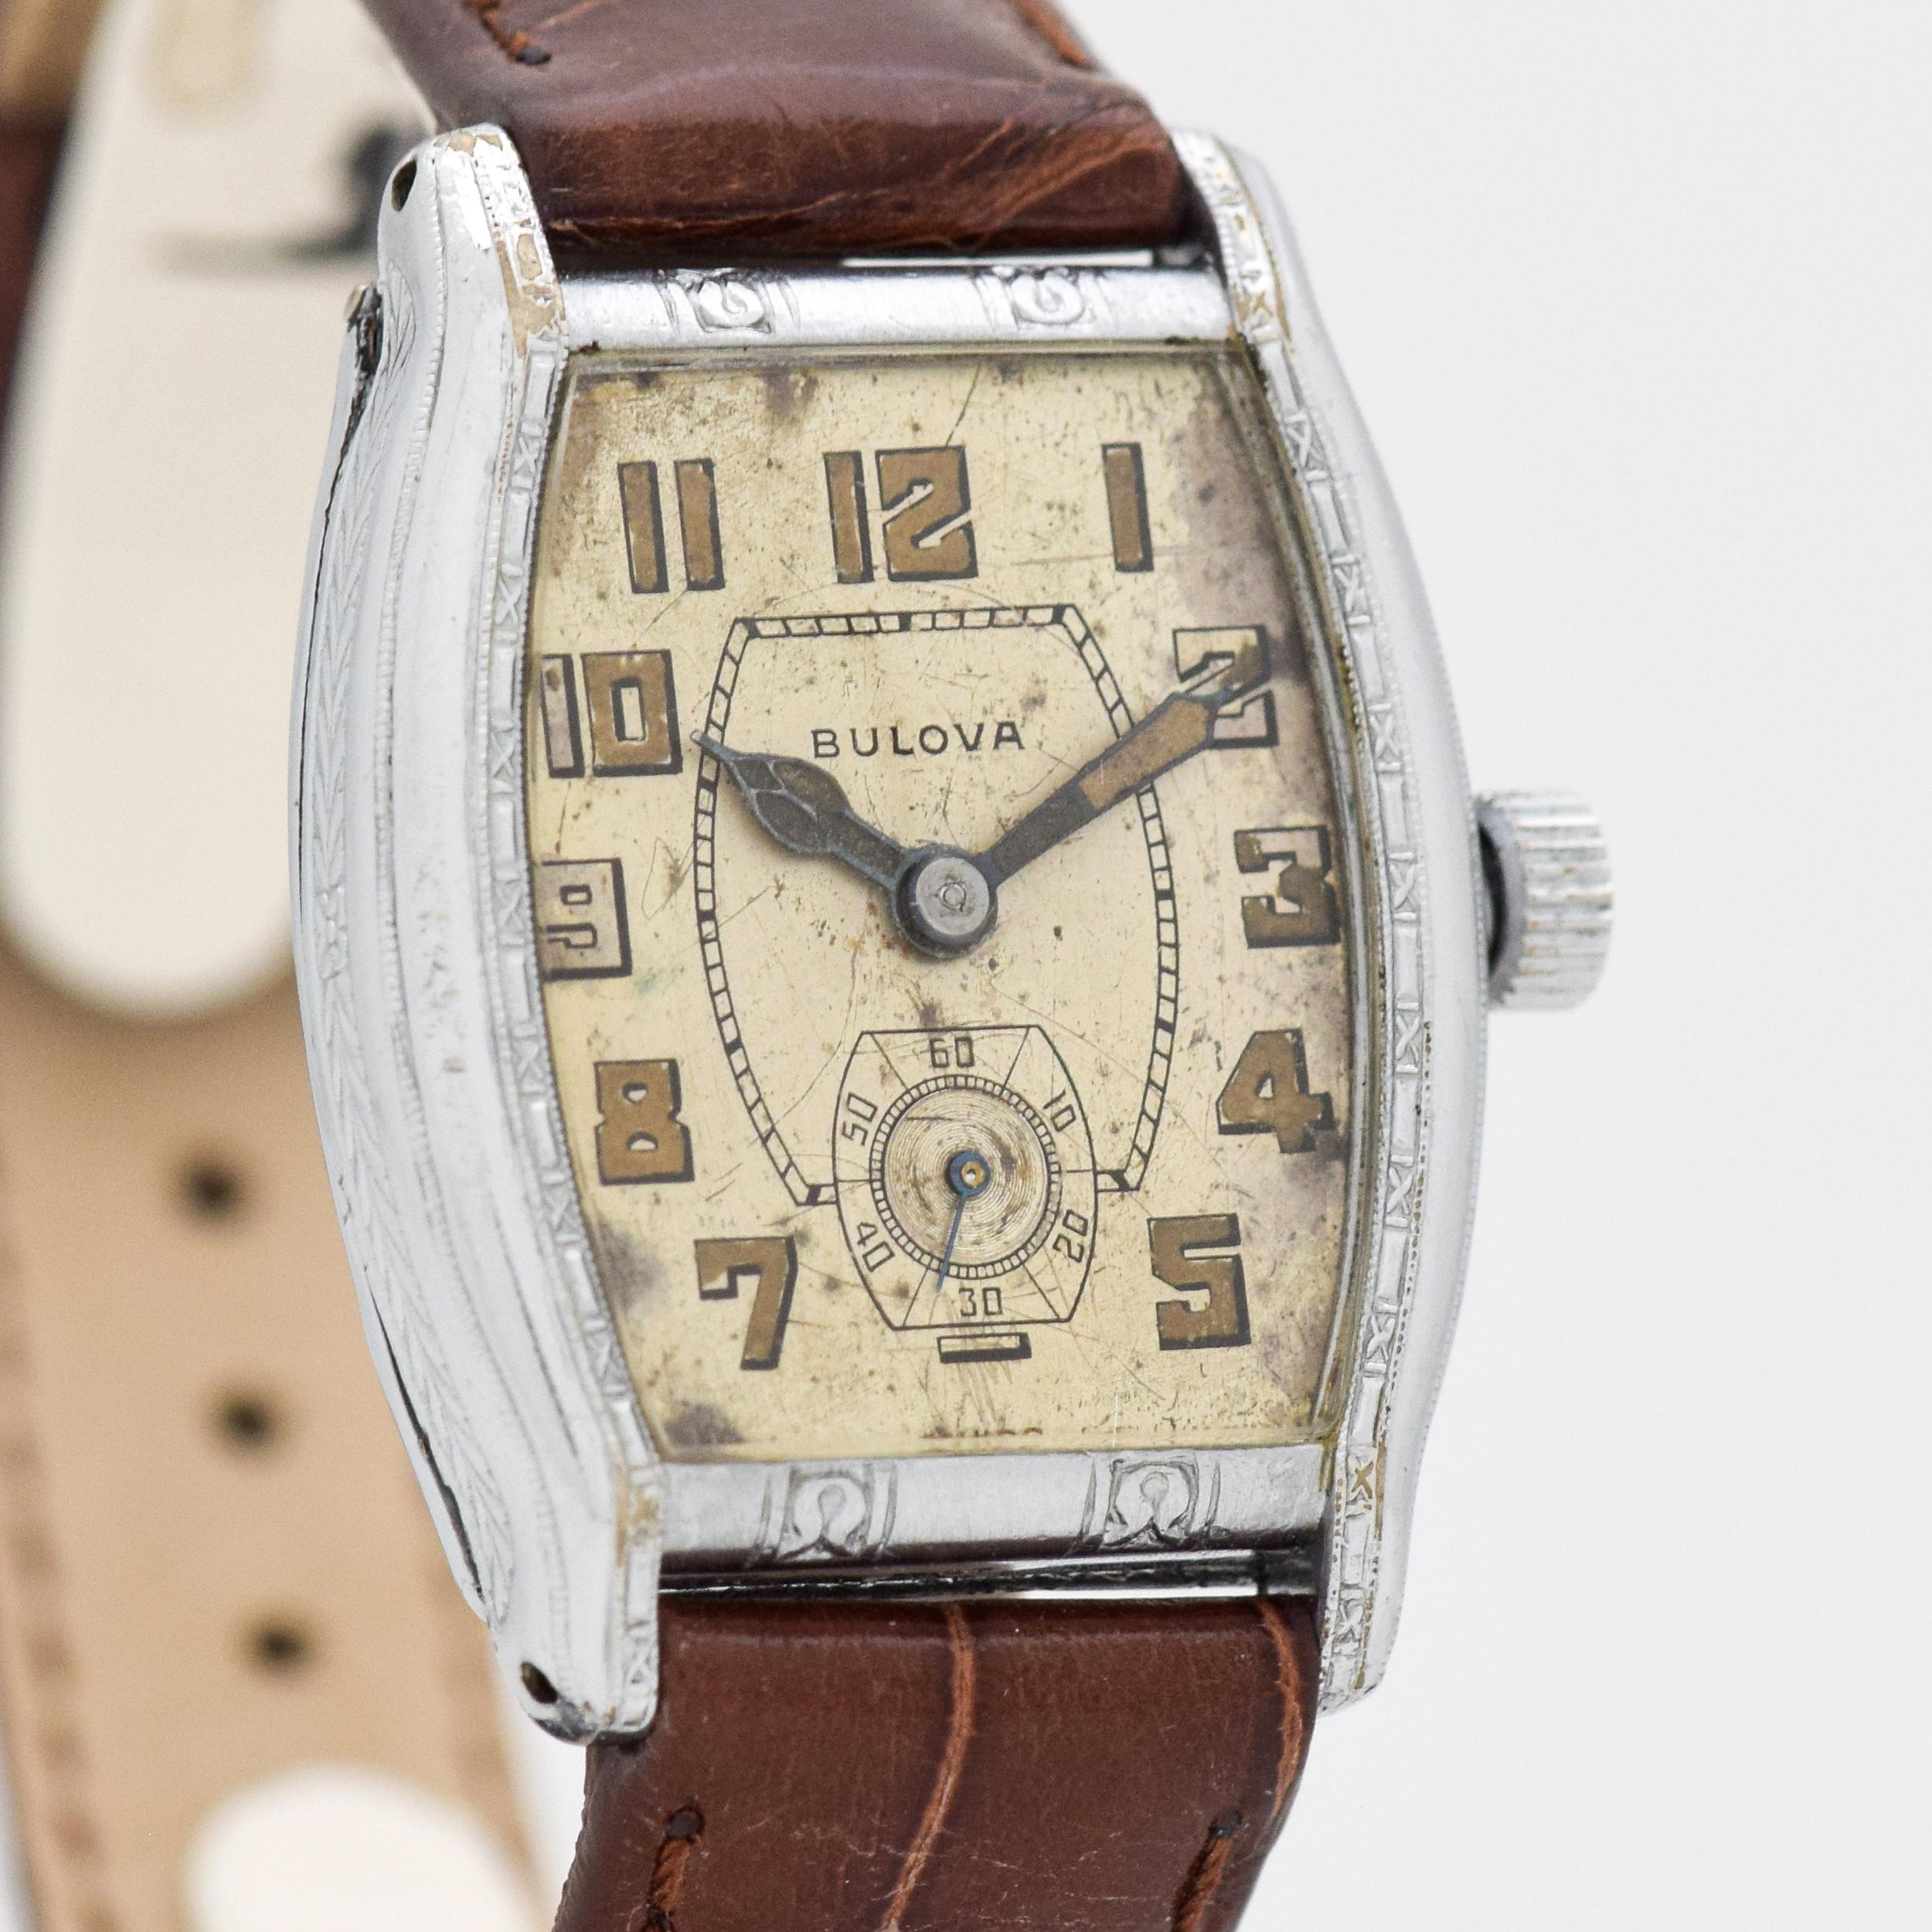 1929 Vintage Bulova 14k White Gold Filled Art Deco Case watch with Original Patina Silver Dial with Patina Luminous Arabic Numbers. Case size, 26mm x 35mm lug to lug (1.02 in. x 1.38 in.) - Powered by a 17-jewel, manual caliber movement. Tripe